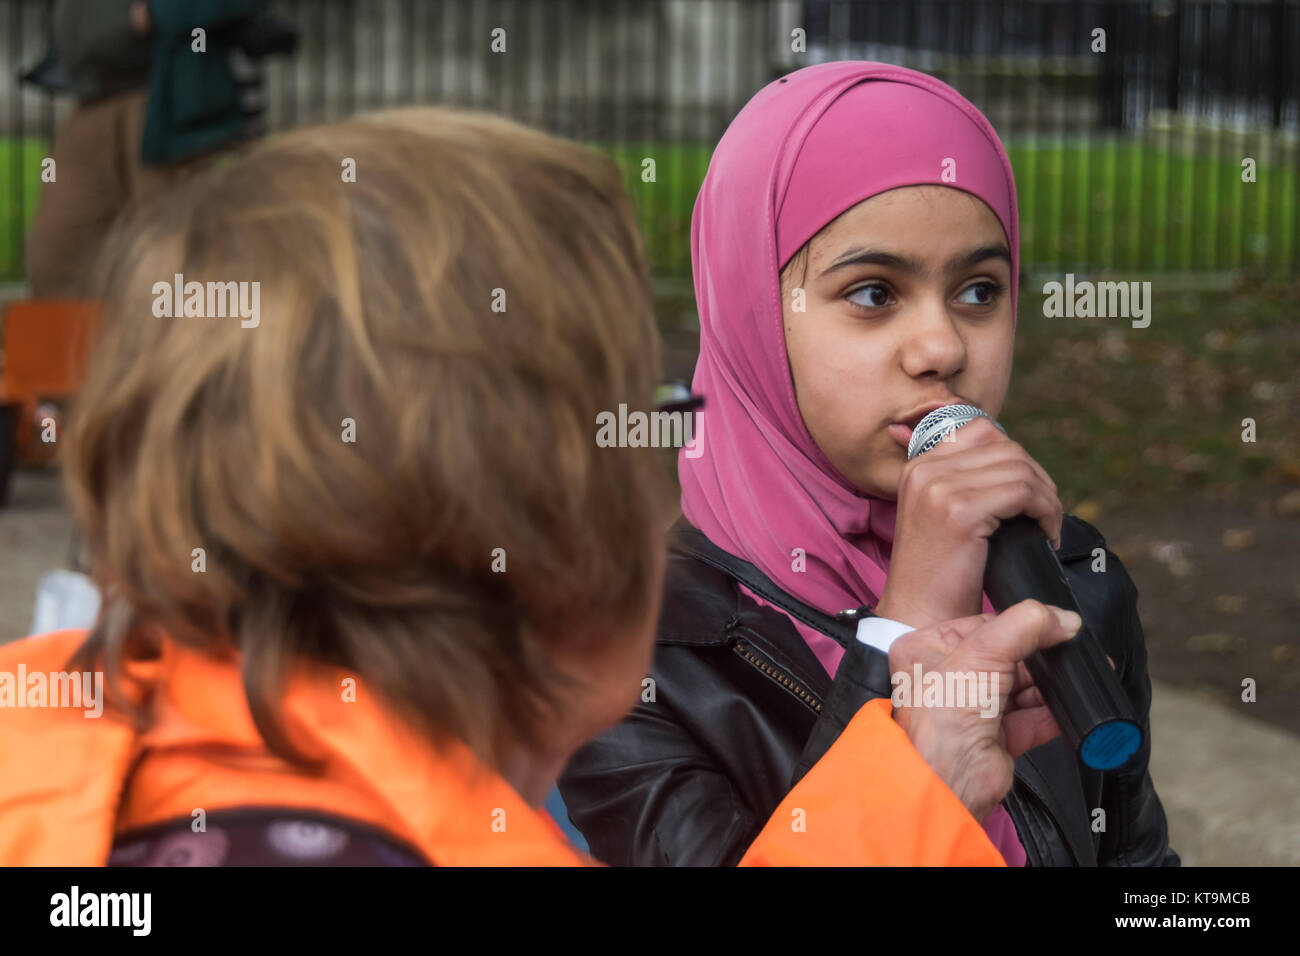 Zainab Omar speaks calling for the release of her father Shawki Ahmed Omar who she has never seen. Her parents were held by the US in Iraq in 2004 and tortured. Over ten years later her father is still in indefinite detention in Iraq. Stock Photo